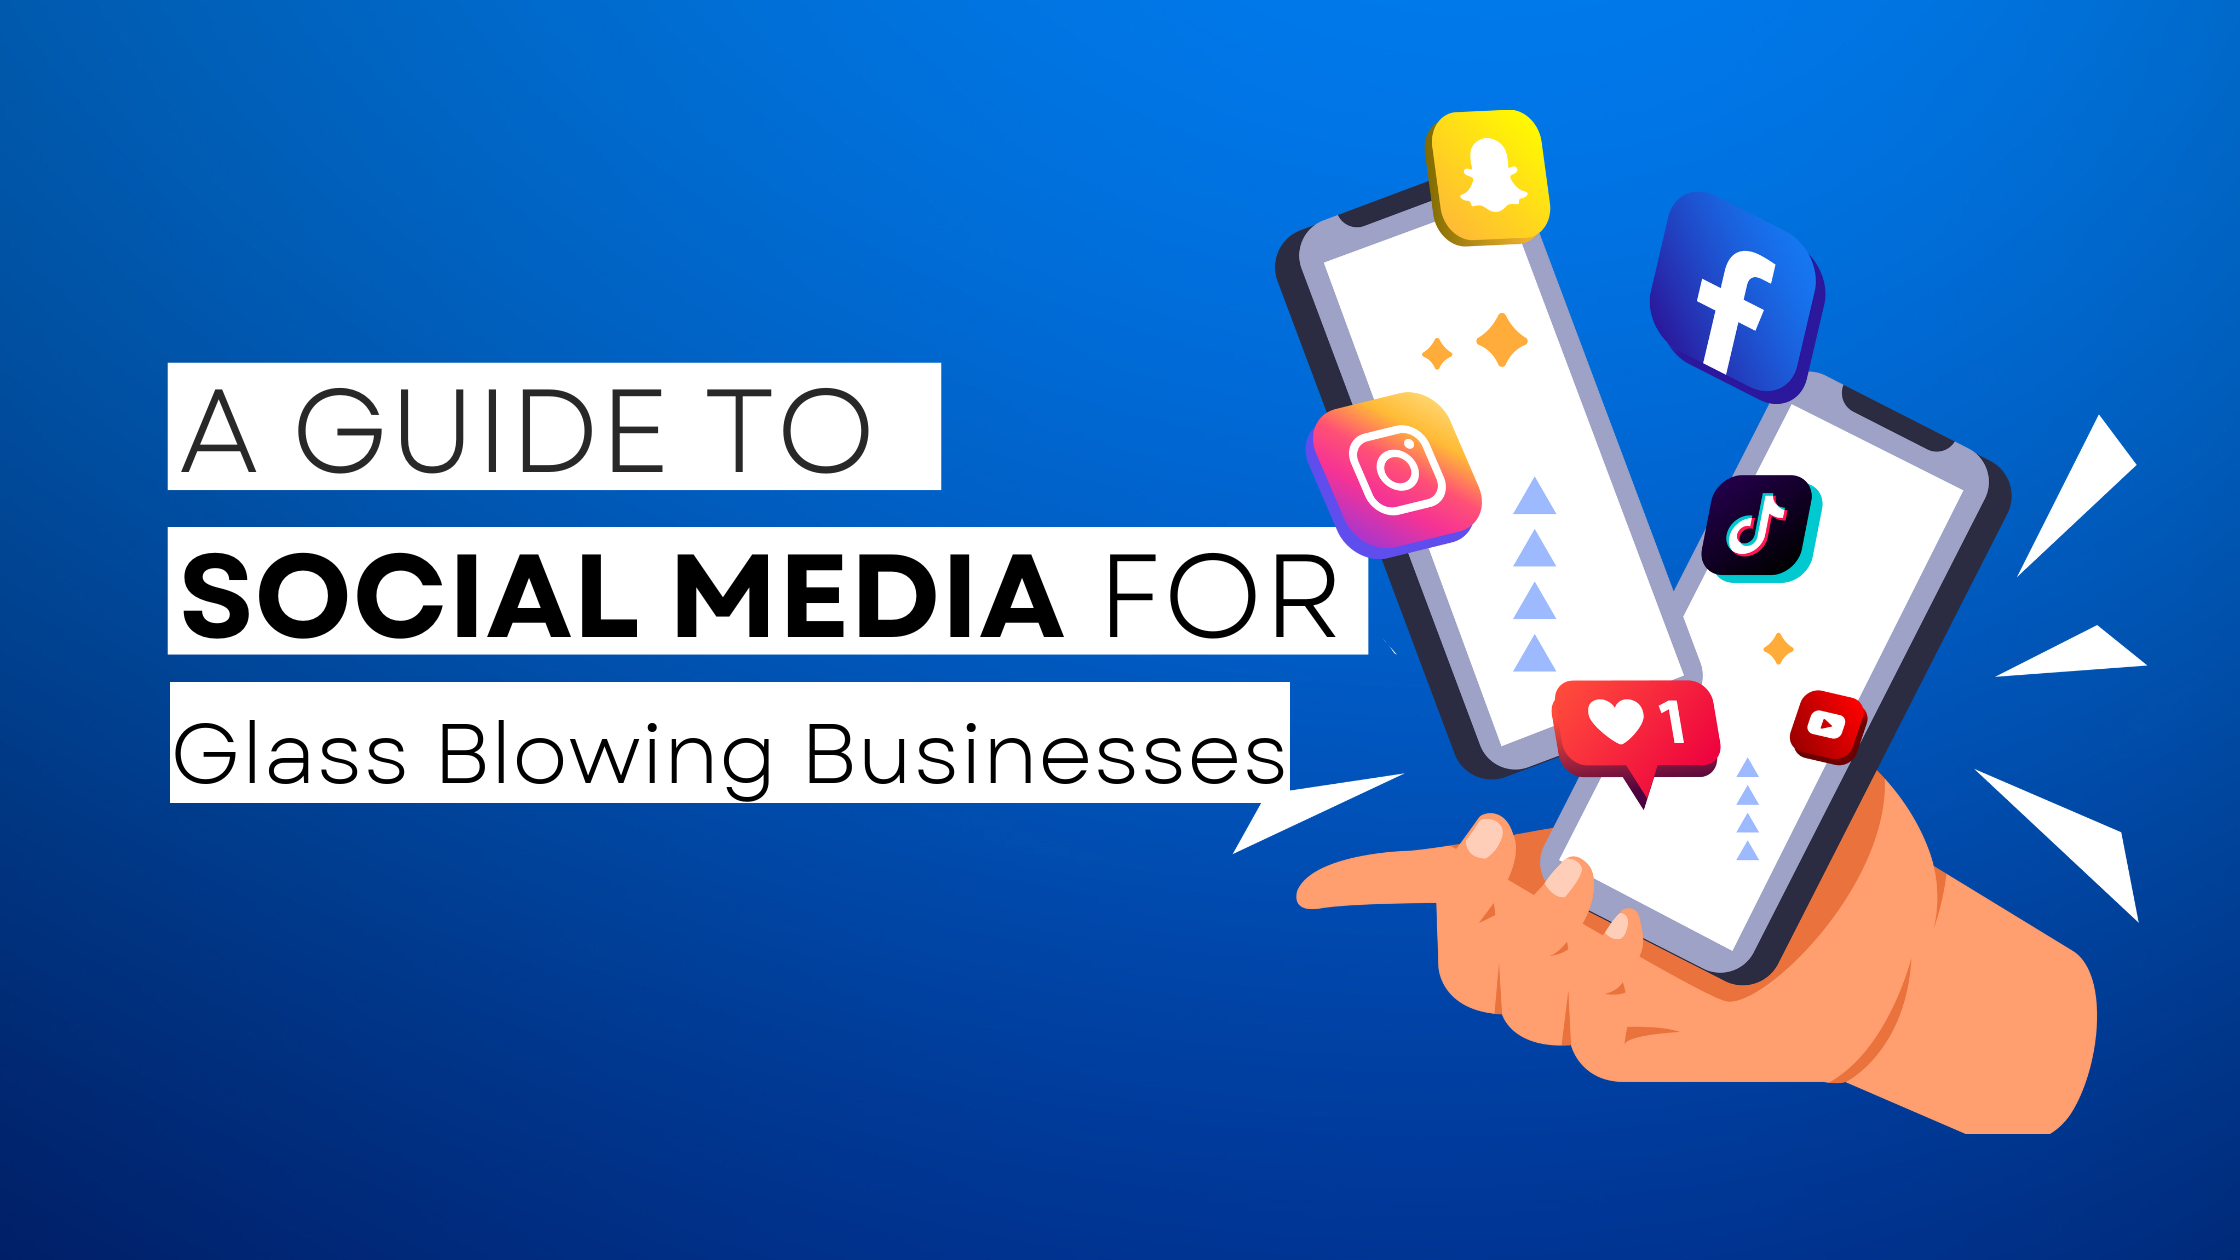 How to start Glass Blowing  on social media